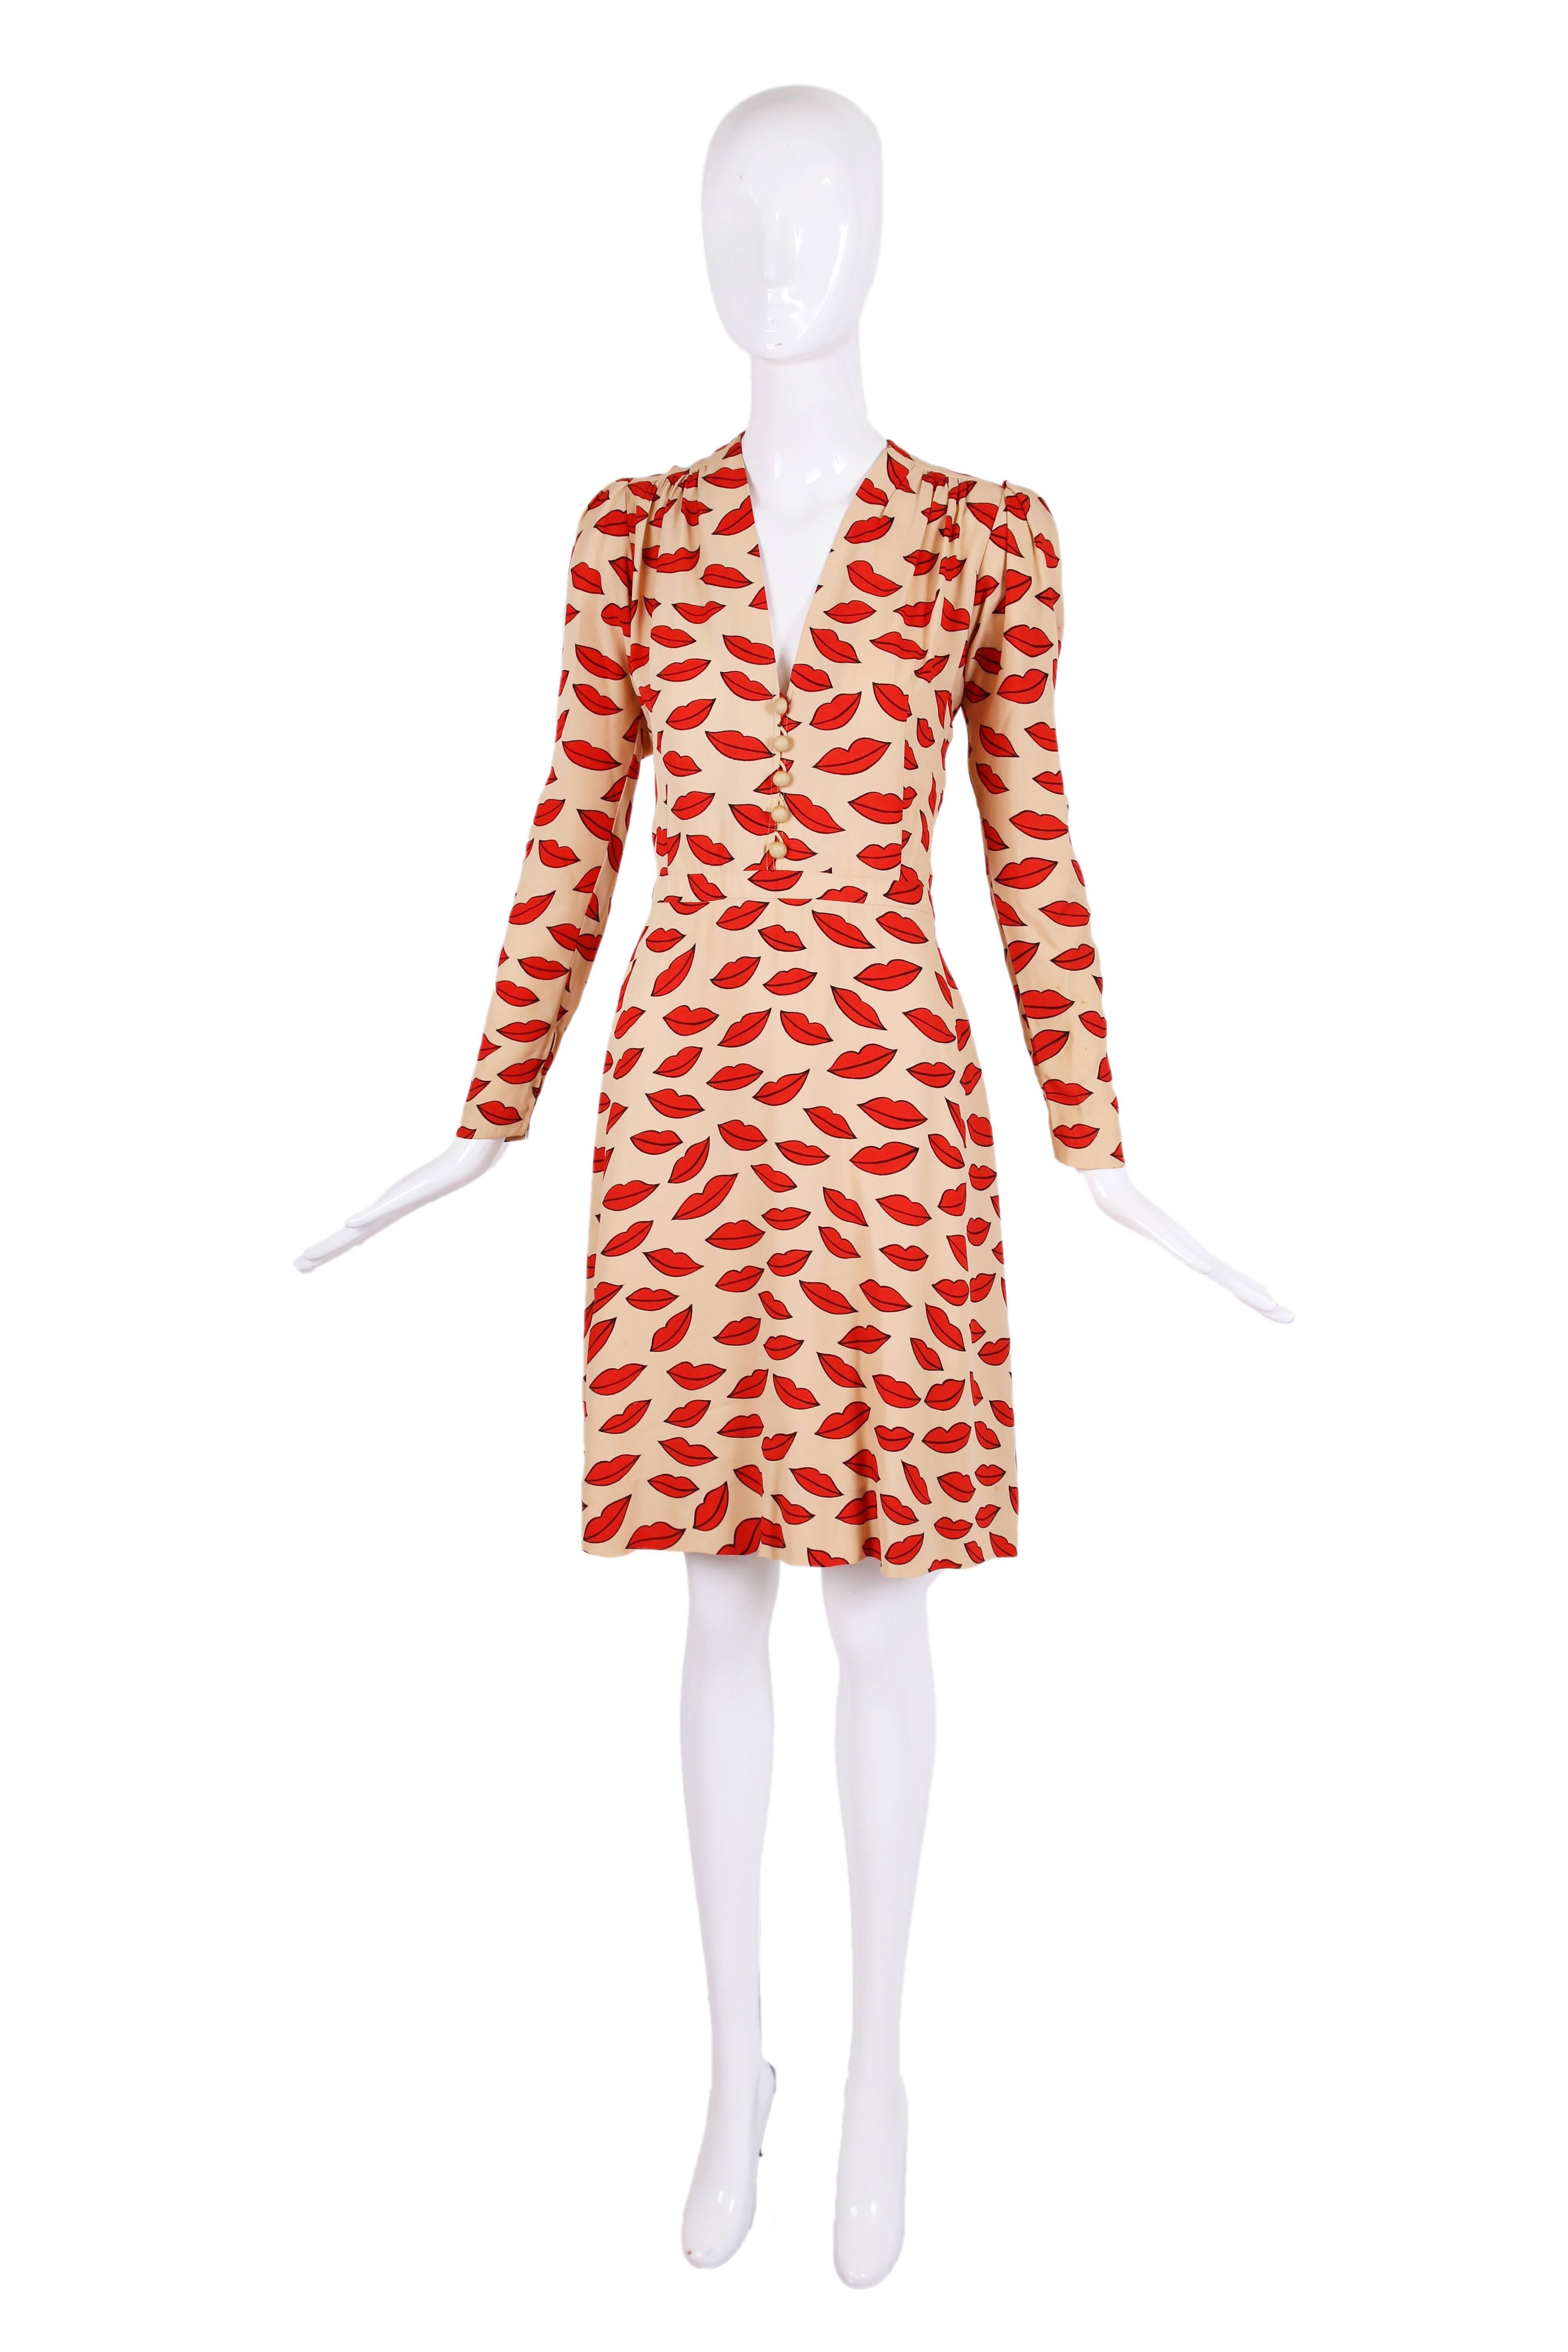 The celebrated 1971 Yves Saint Laurent lips print dress from the collection that was panned when it came out but now universally revered. We are so lucky to be offering this giant of a collector's piece - see original editorial amongst photographs.